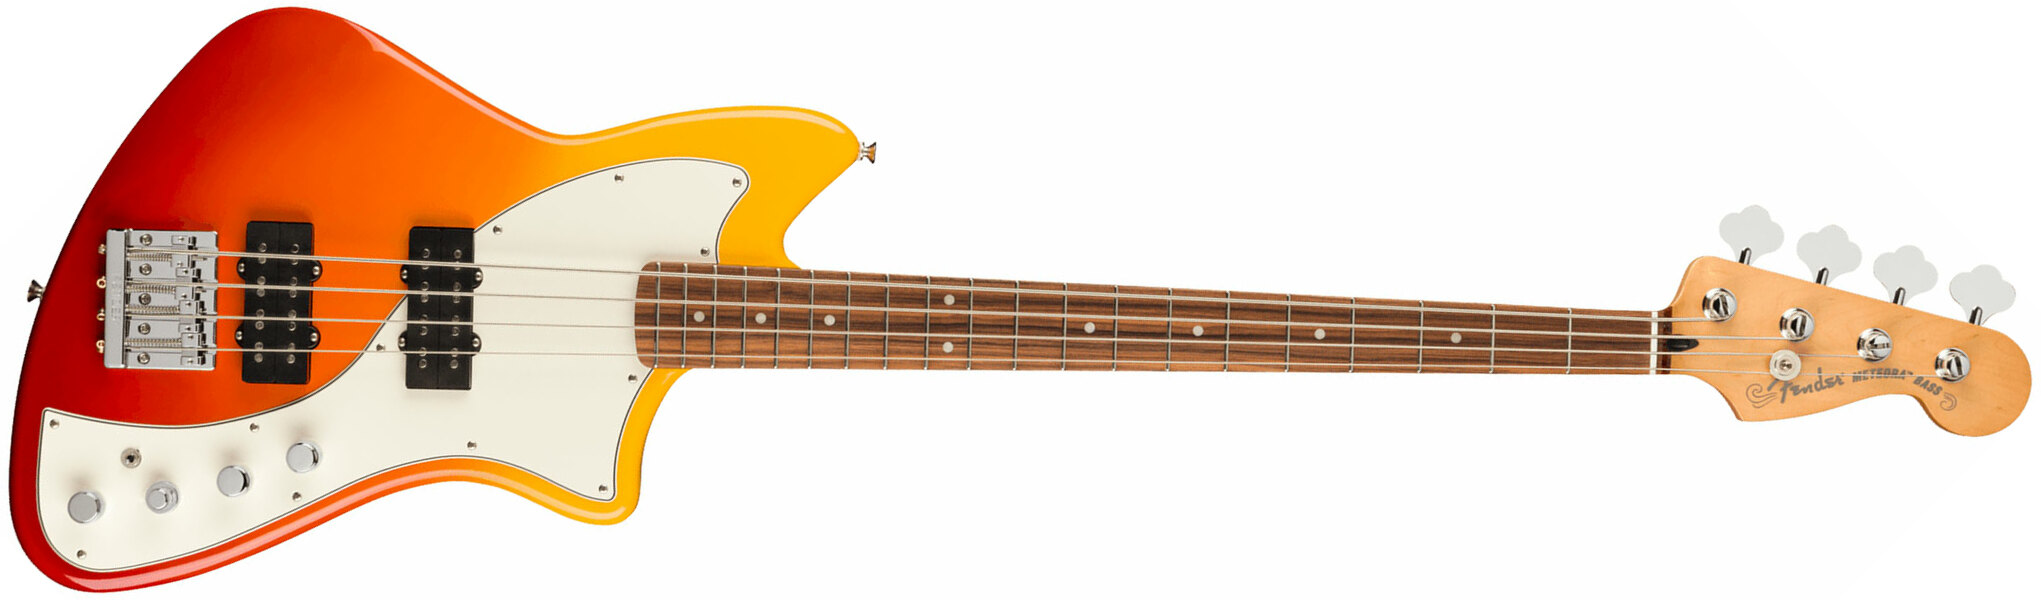 Fender Meteora Bass Active Player Plus Mex Pf - Tequila Sunrise - Solidbody E-bass - Main picture